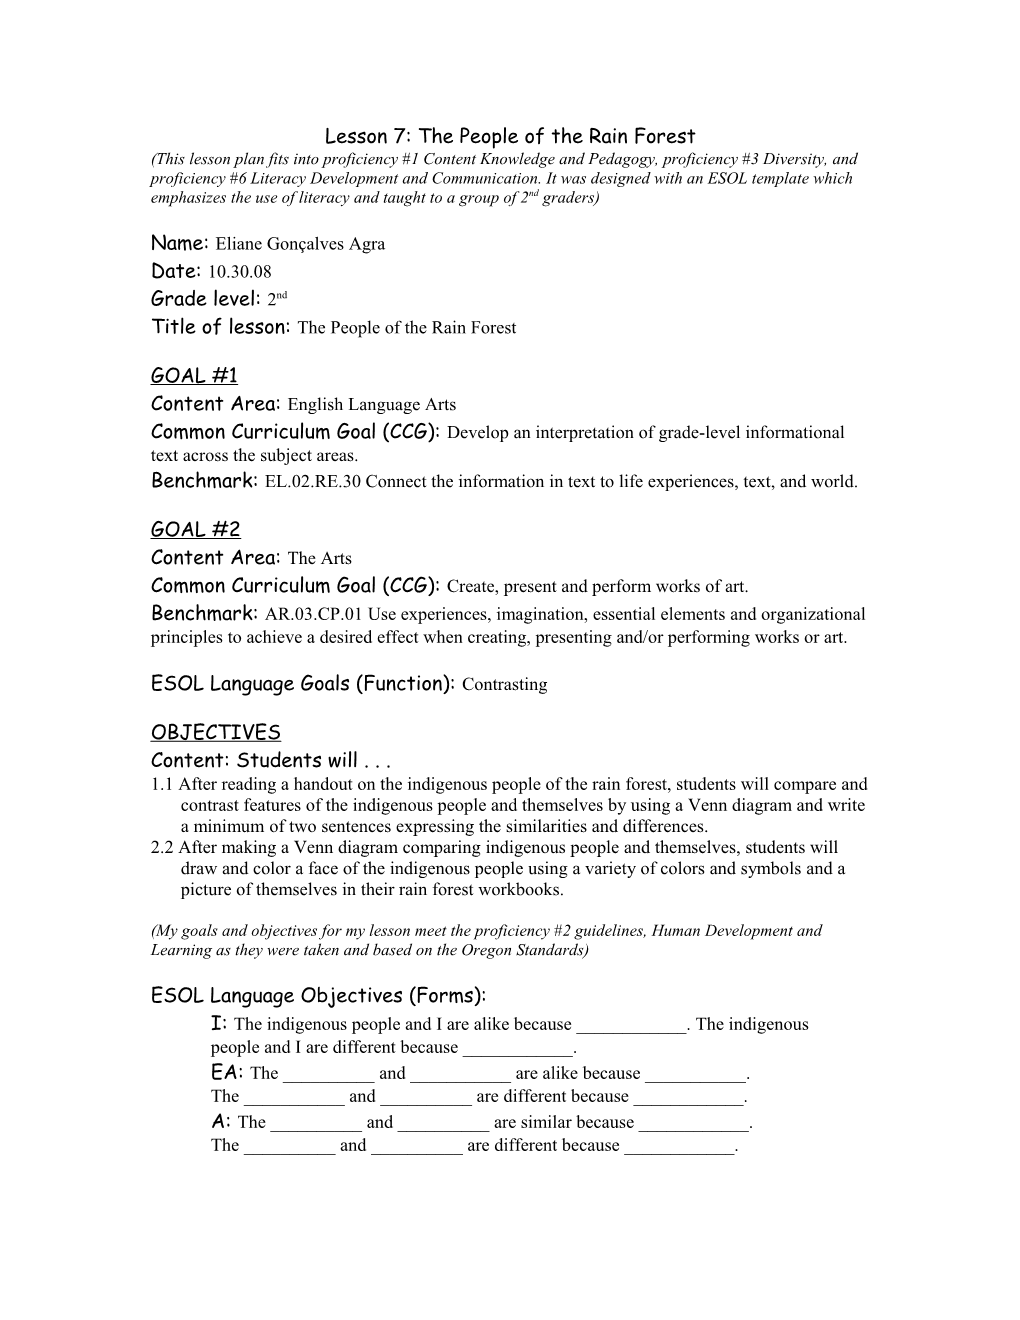 WOU/ESOL Lesson Template